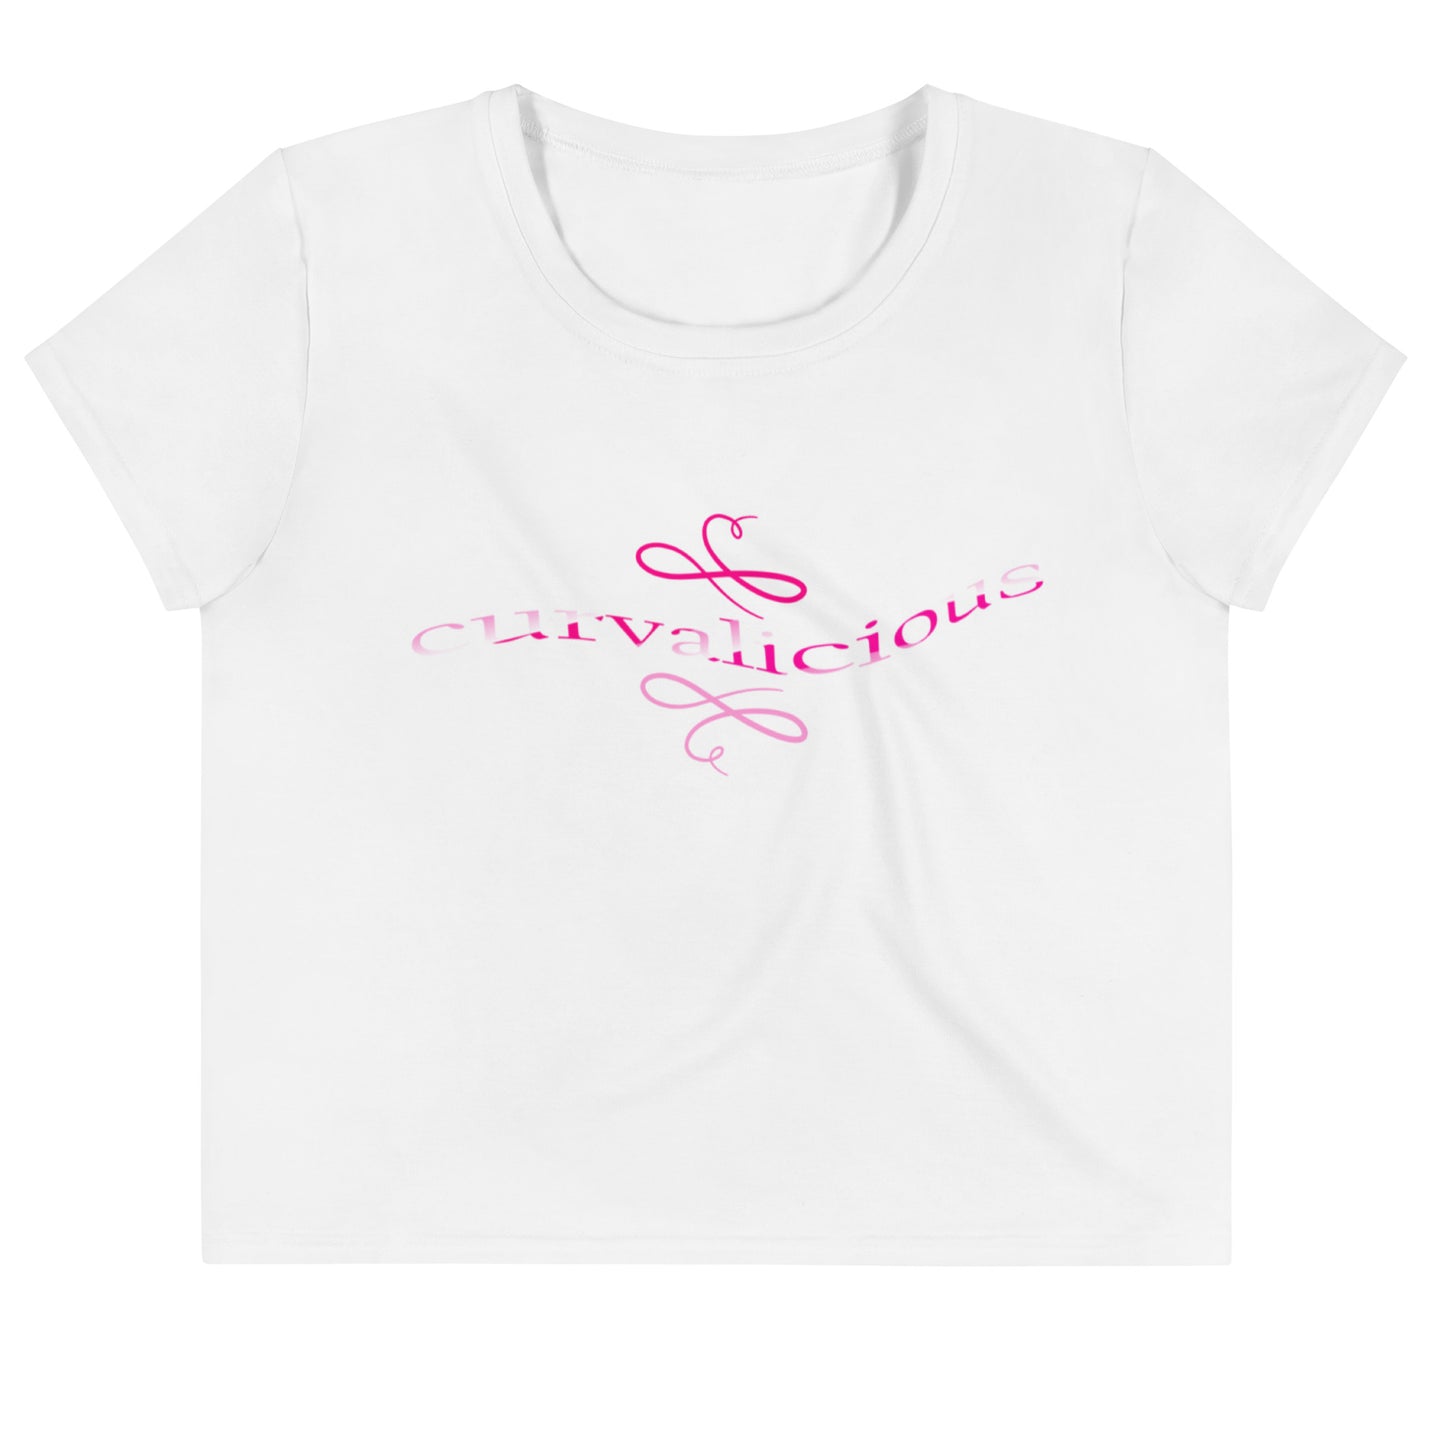 Crop Tee: Curvalicious (text in shades of pink)